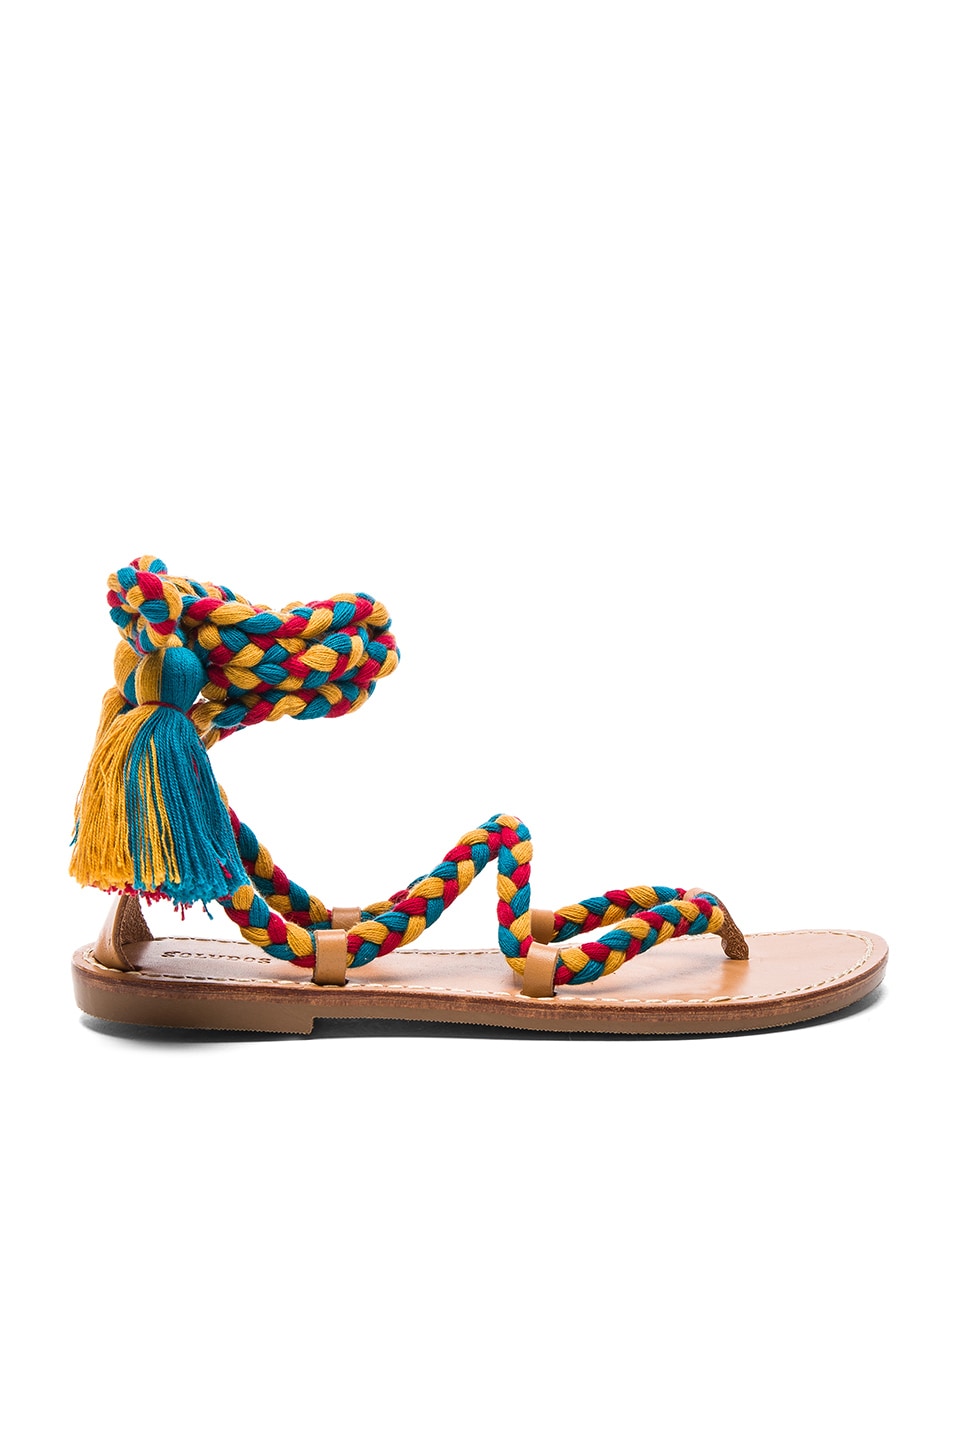 soludos gladiator lace up sandals